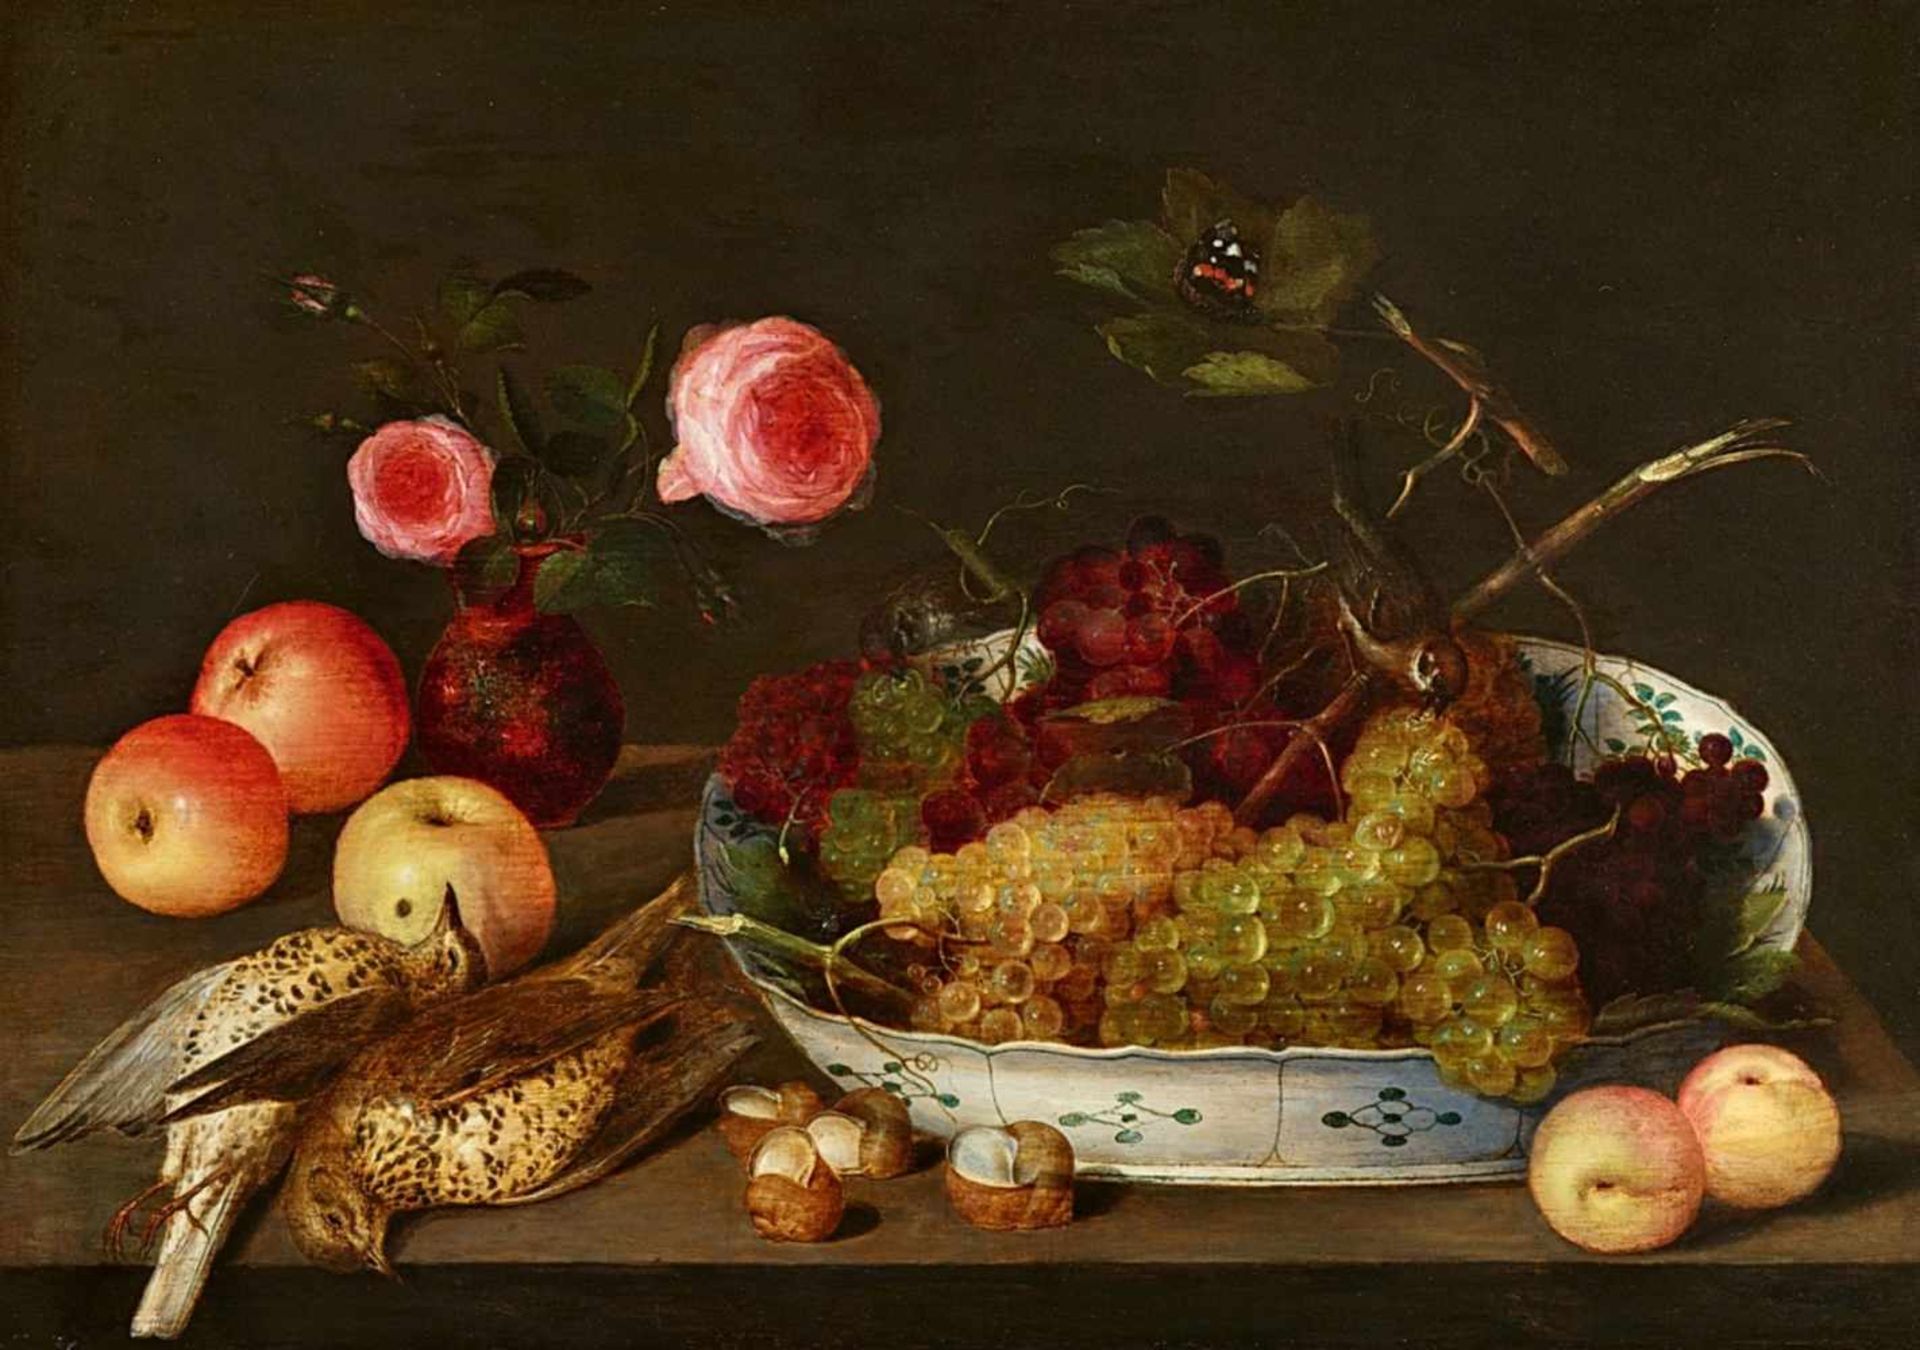 Peter BinoitStill Life with Birds, Roses, Apples, Snails, and Grapes in a Wan-Li DishOil on panel.